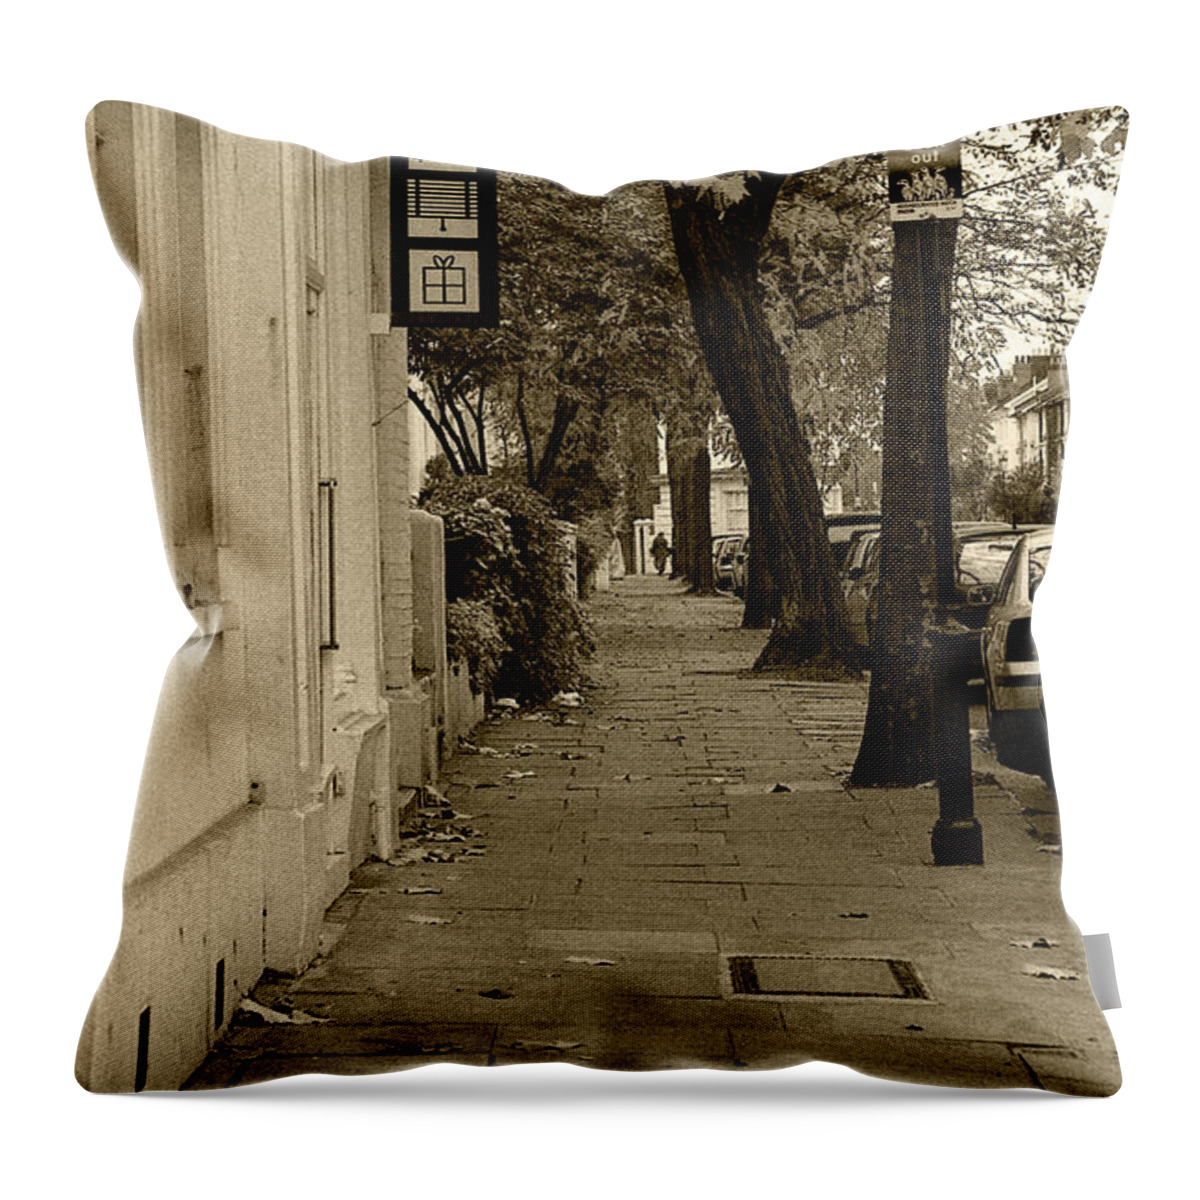 London Throw Pillow featuring the photograph A London Street I by Ayesha Lakes